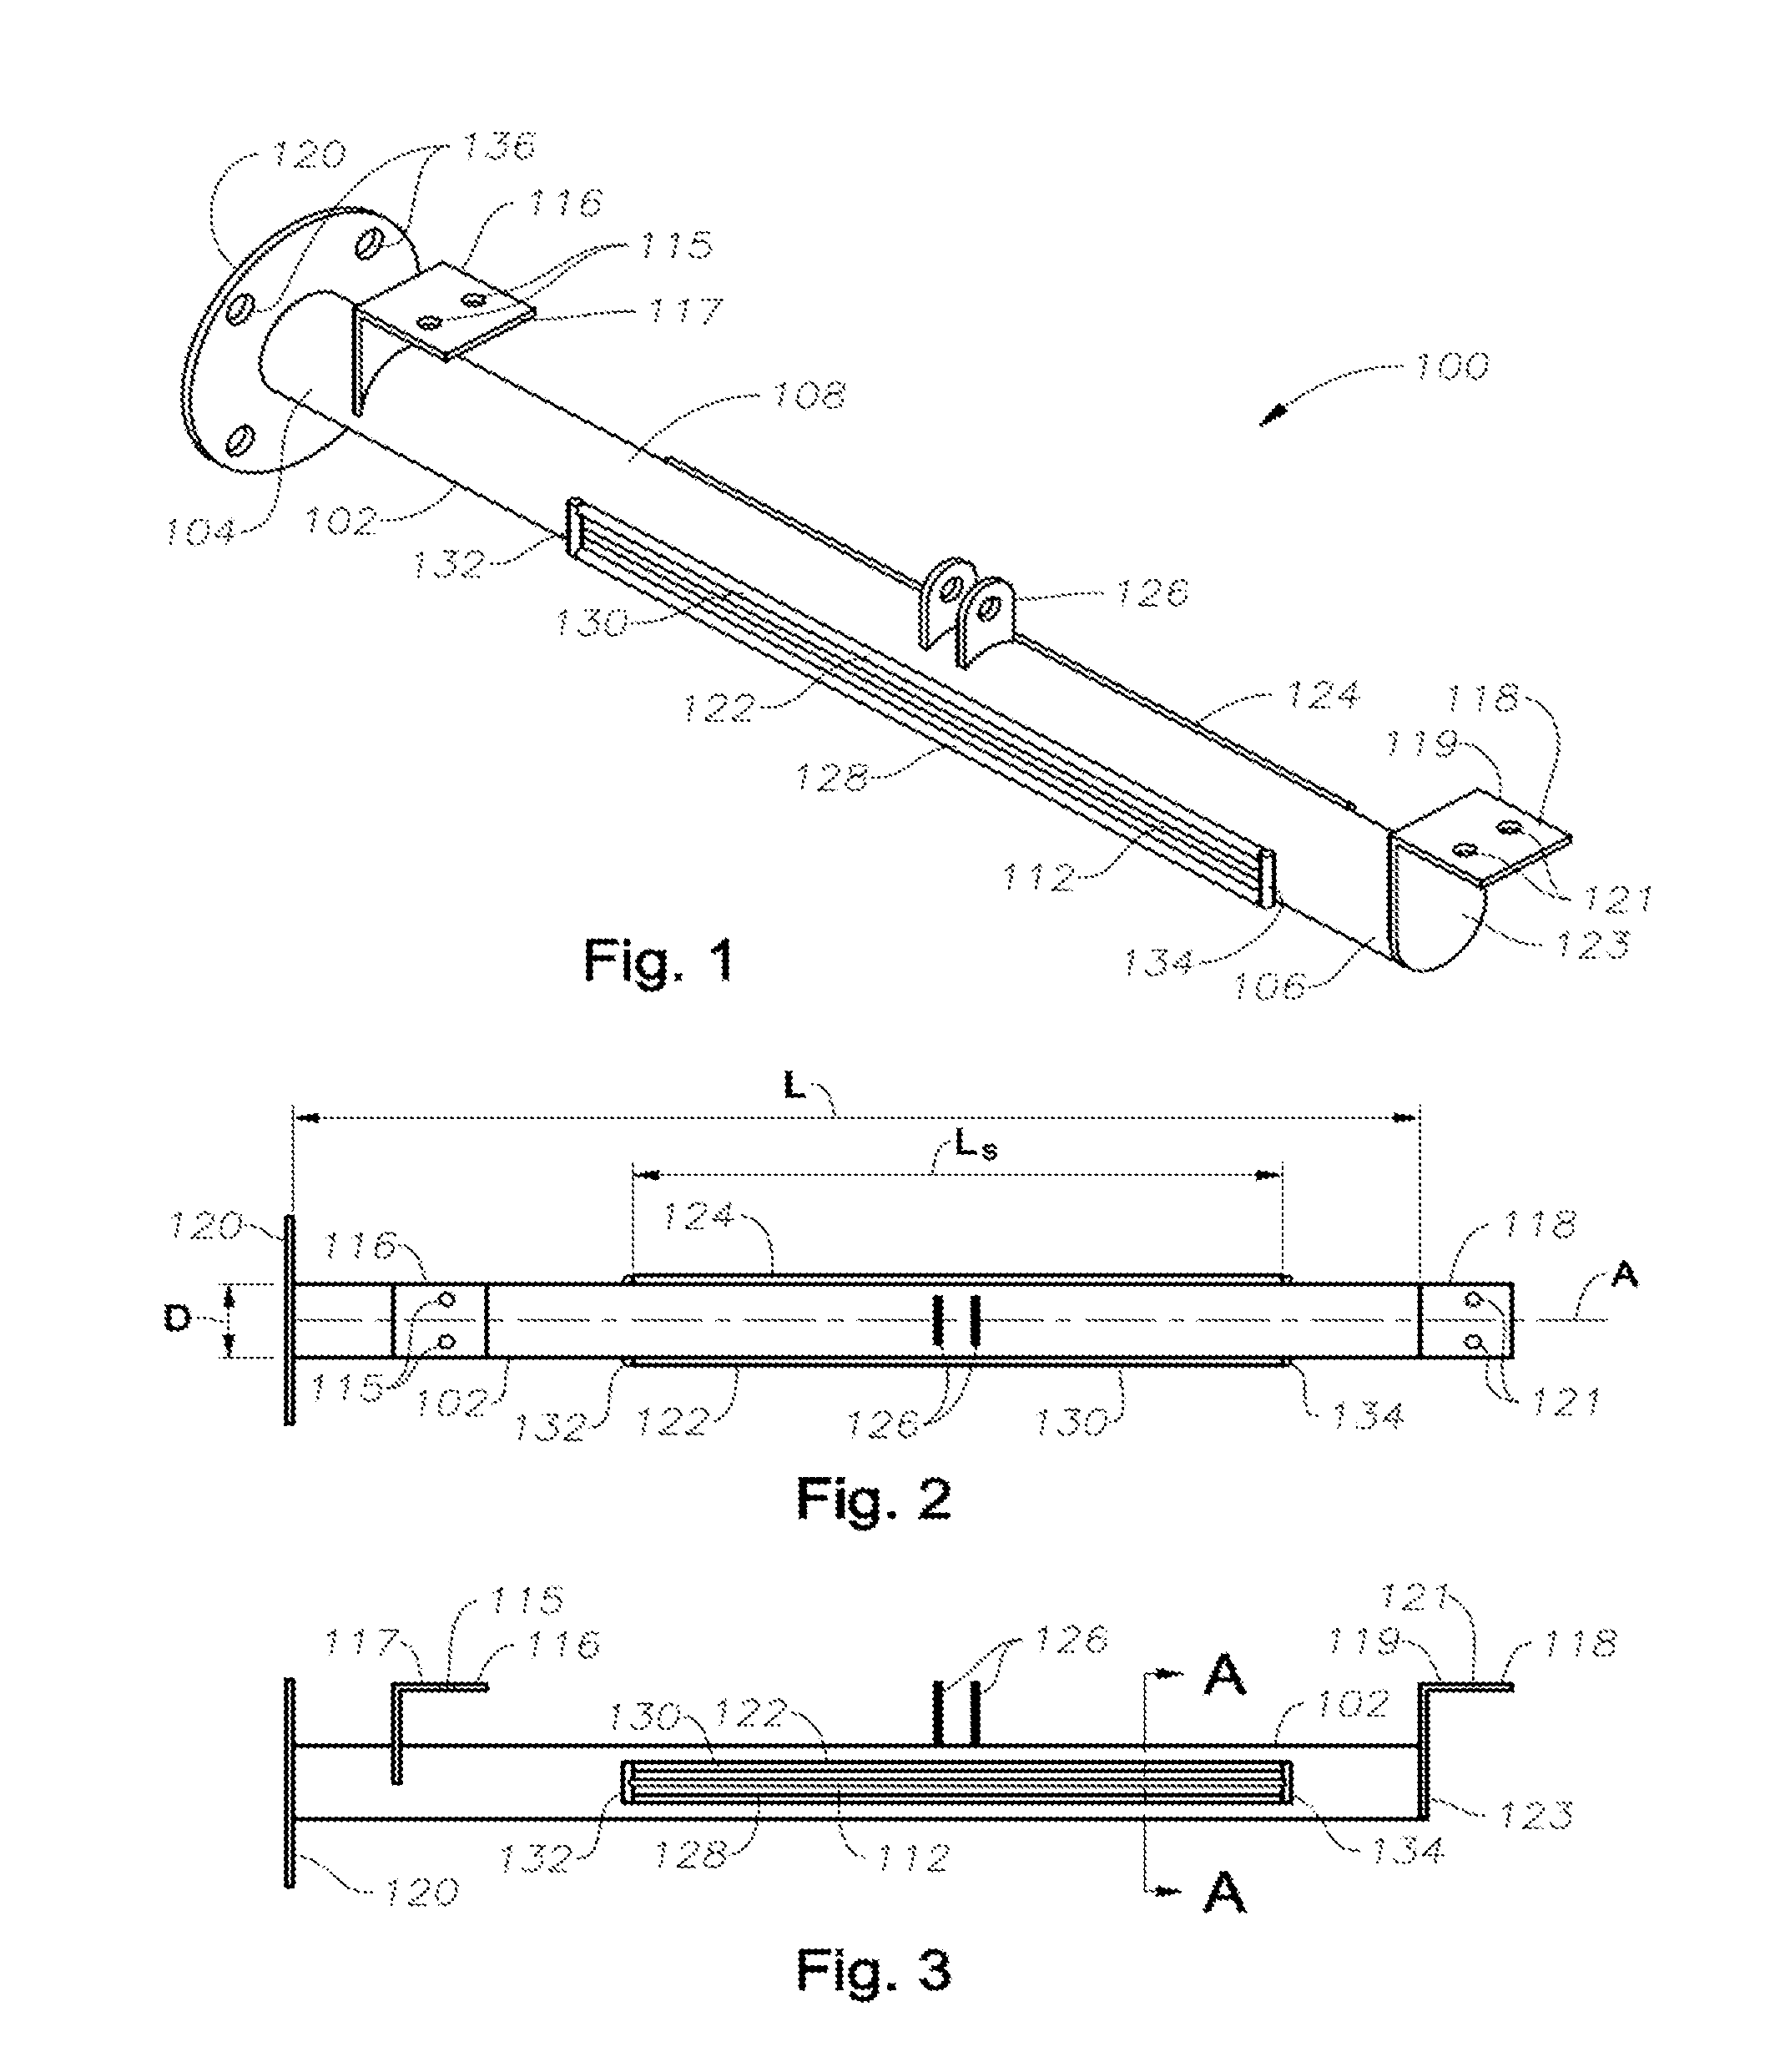 Methods and apparatus for treating water and wastewater employing a cloth disk filter